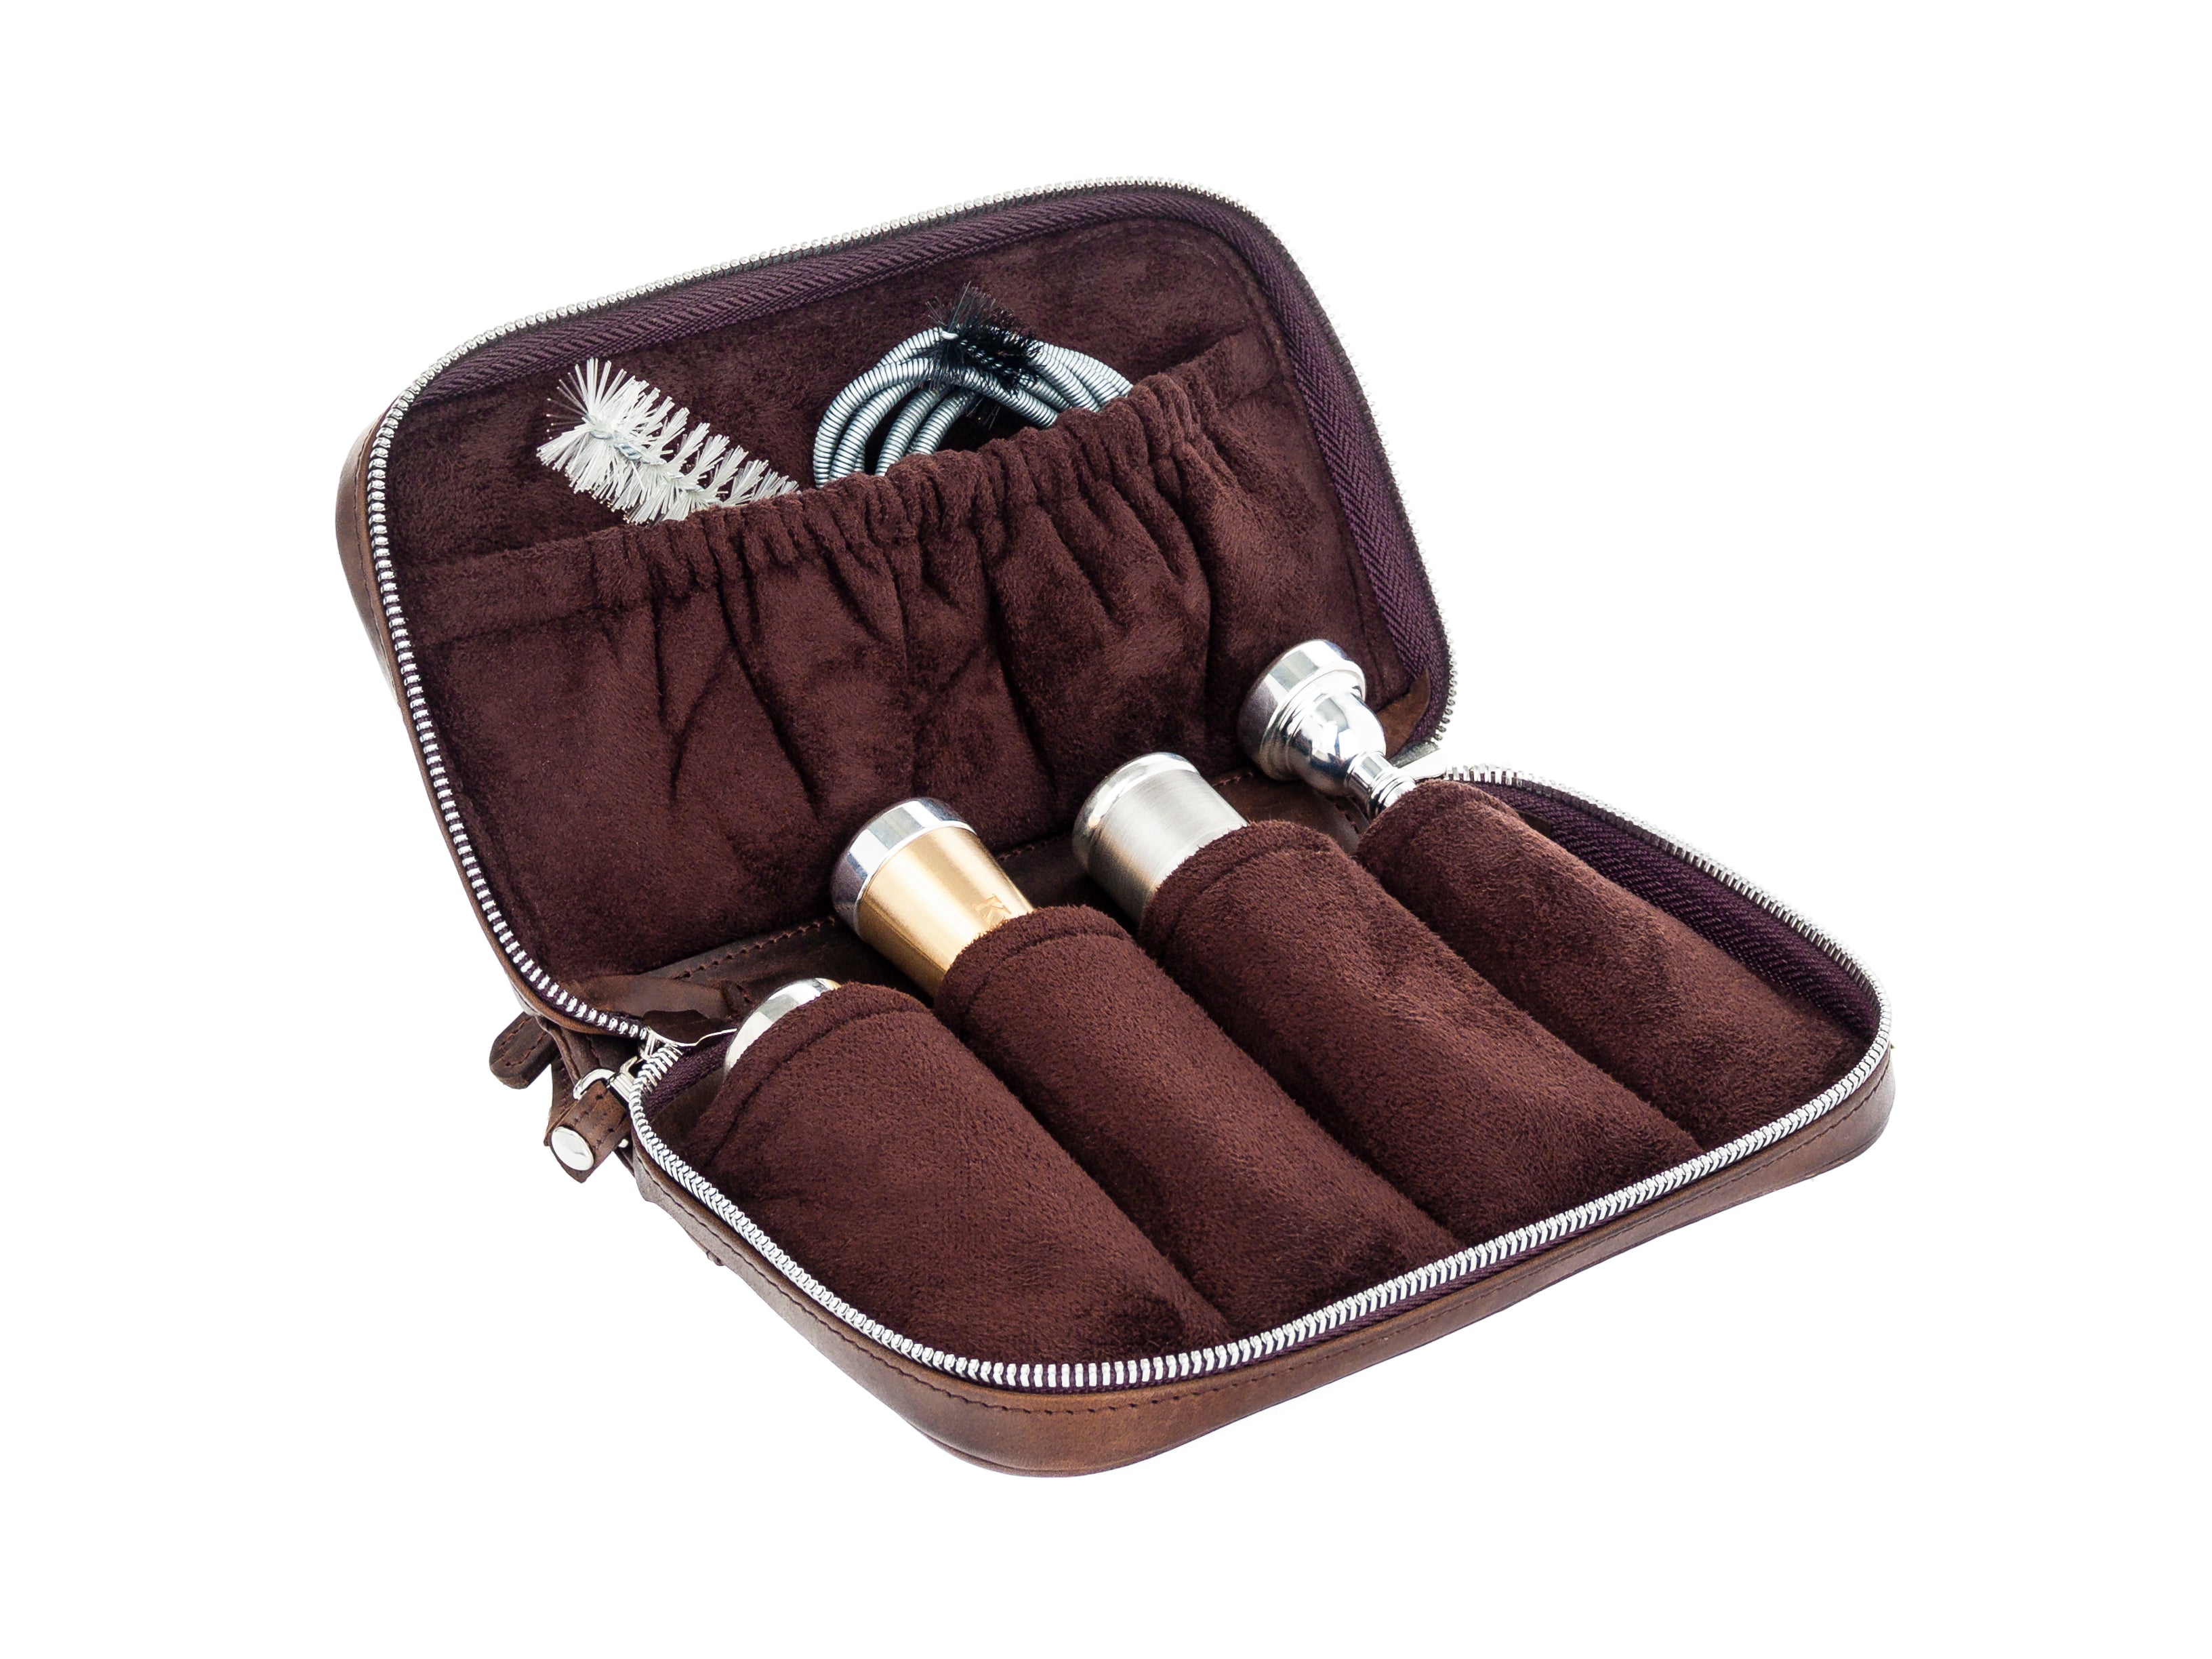 Gift set for Trumpet Player #2 | Mouthpiece Booster + Pouch + Valve Guard